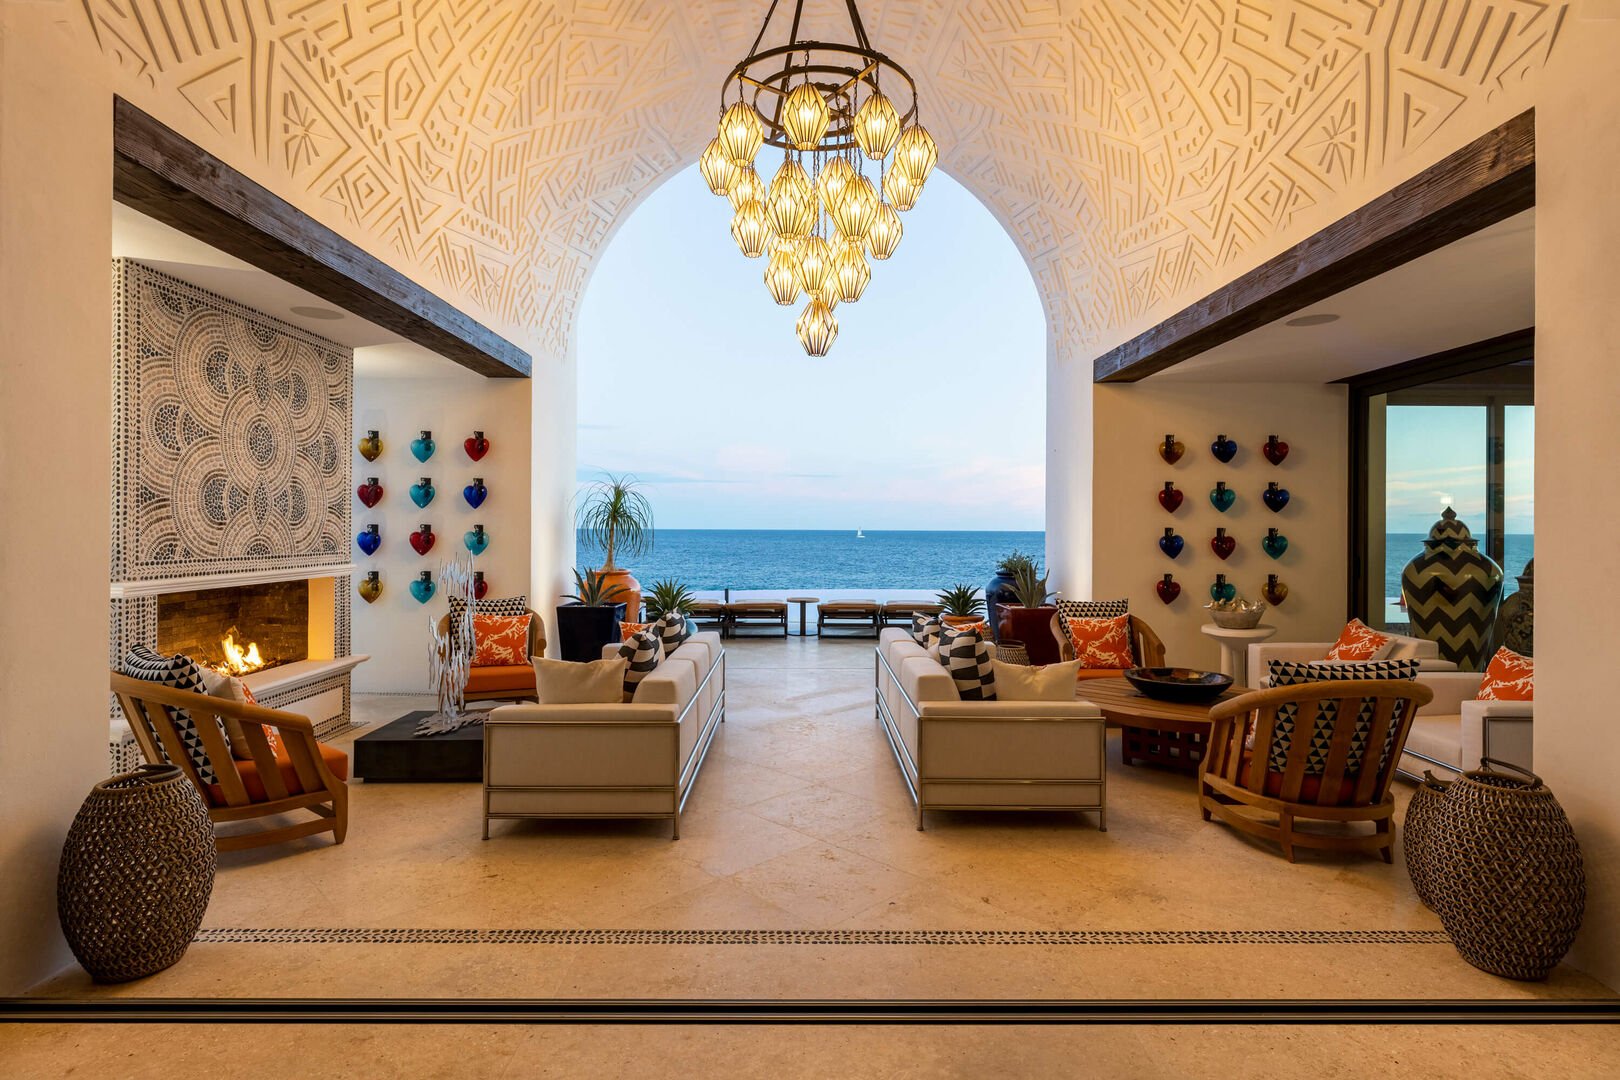 A sitting area with multiple chairs and couches, and a large archway facing the ocean.